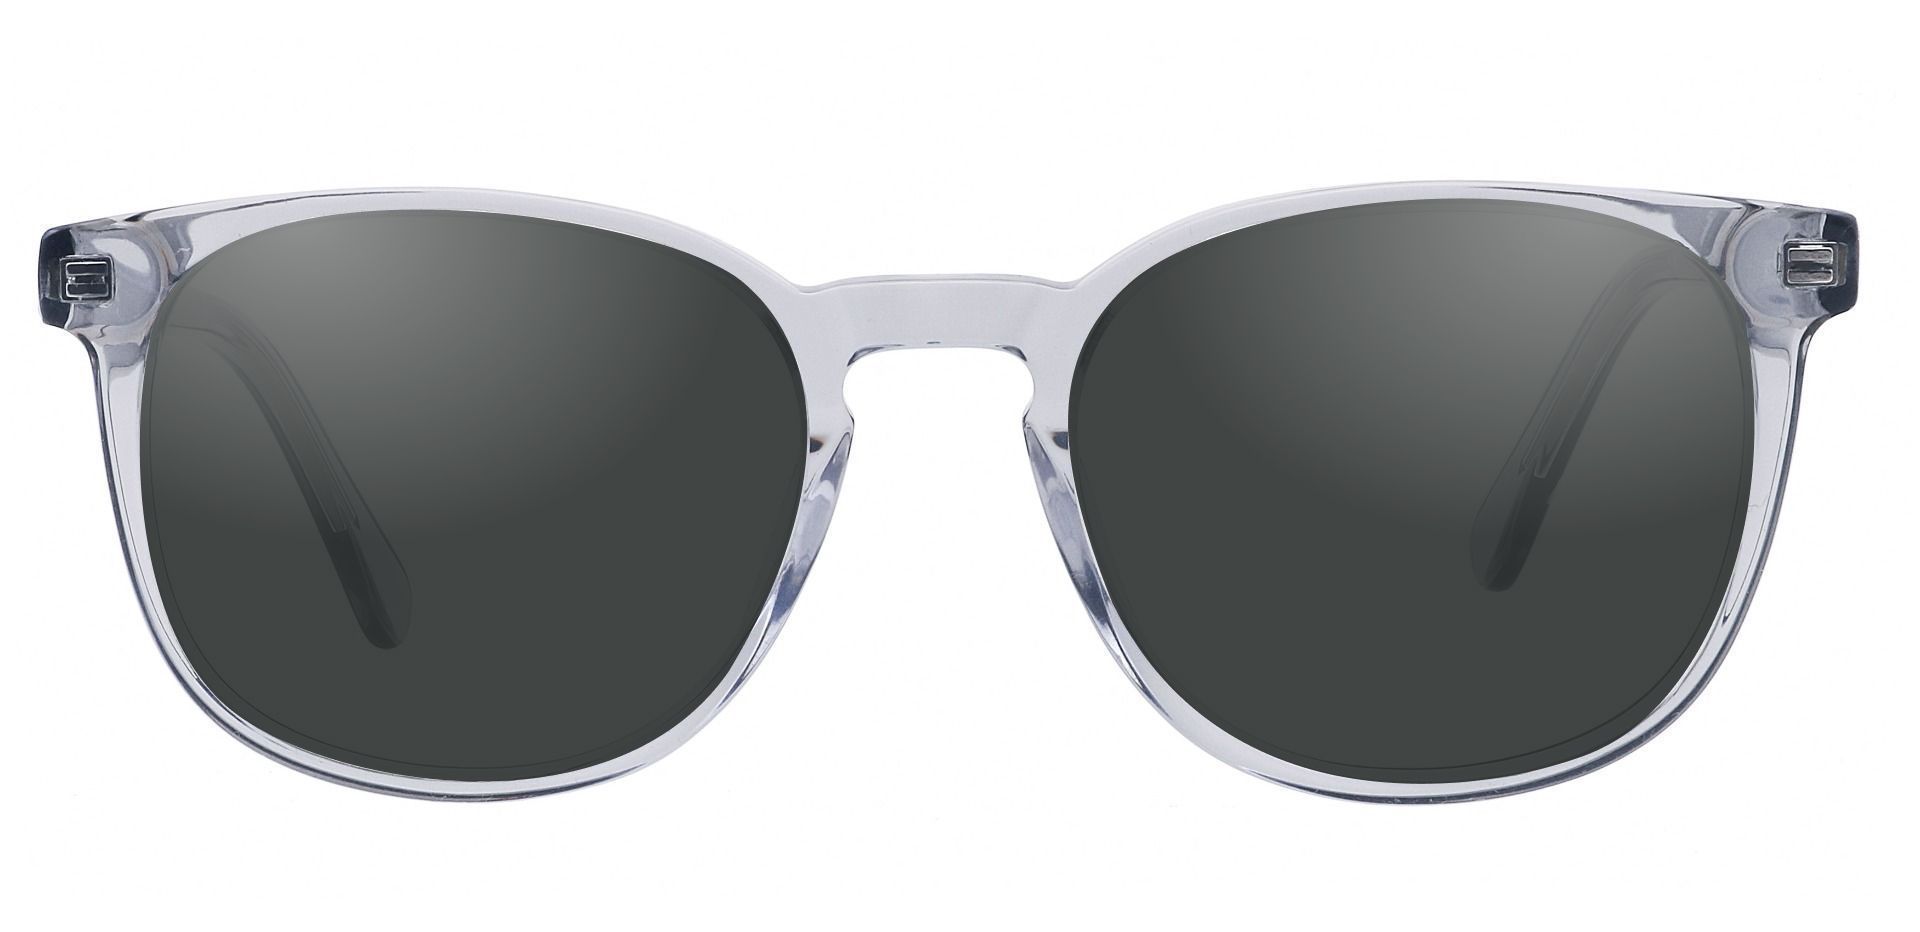 Nebula Round Lined Bifocal Sunglasses - Gray Frame With Gray Lenses